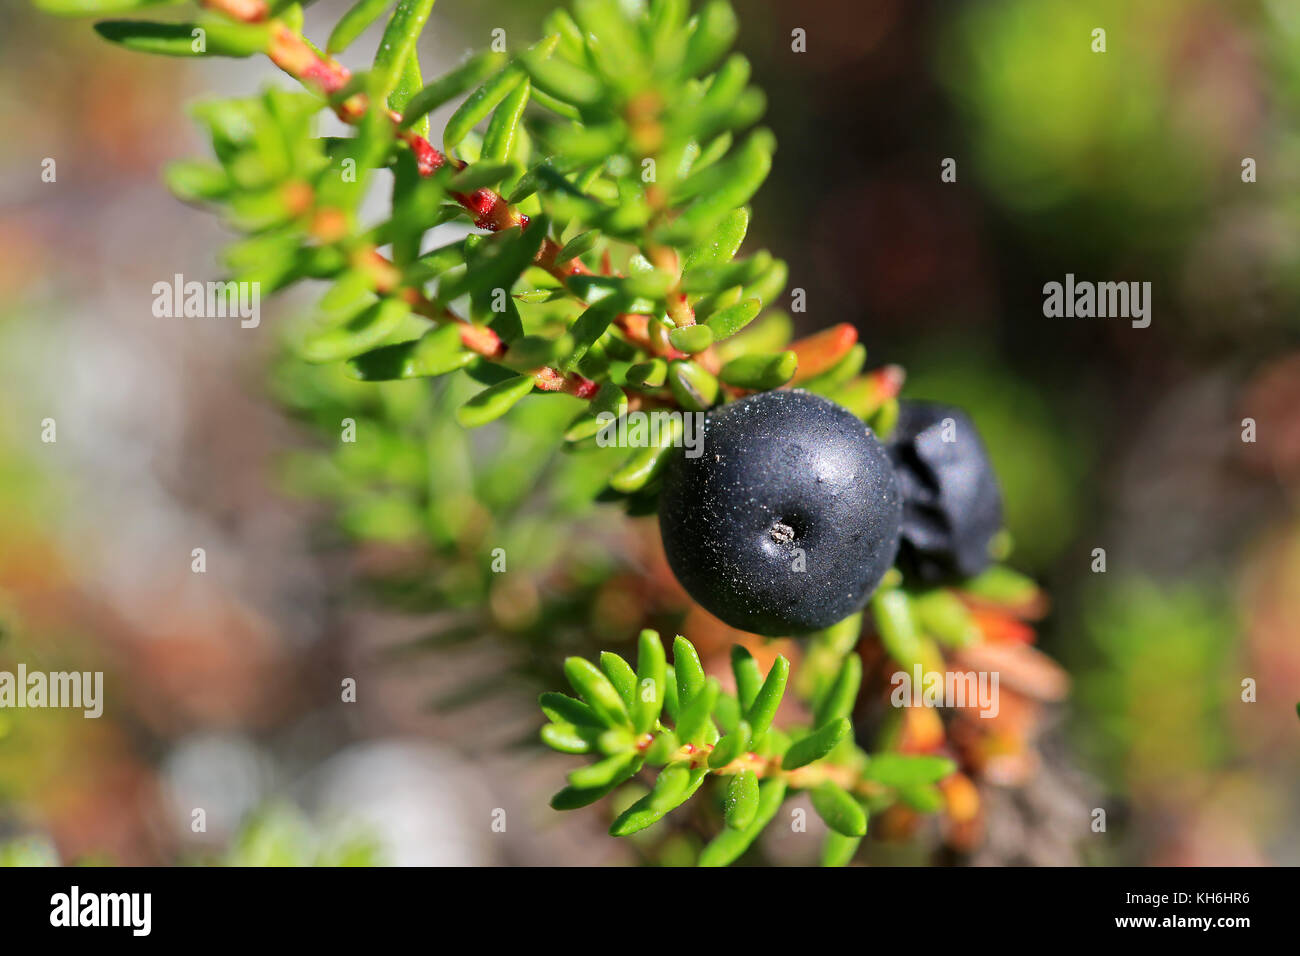 Extreme close up of  Black Crowberry or Empetrum nigrum berries. Shallow depth of field. Stock Photo